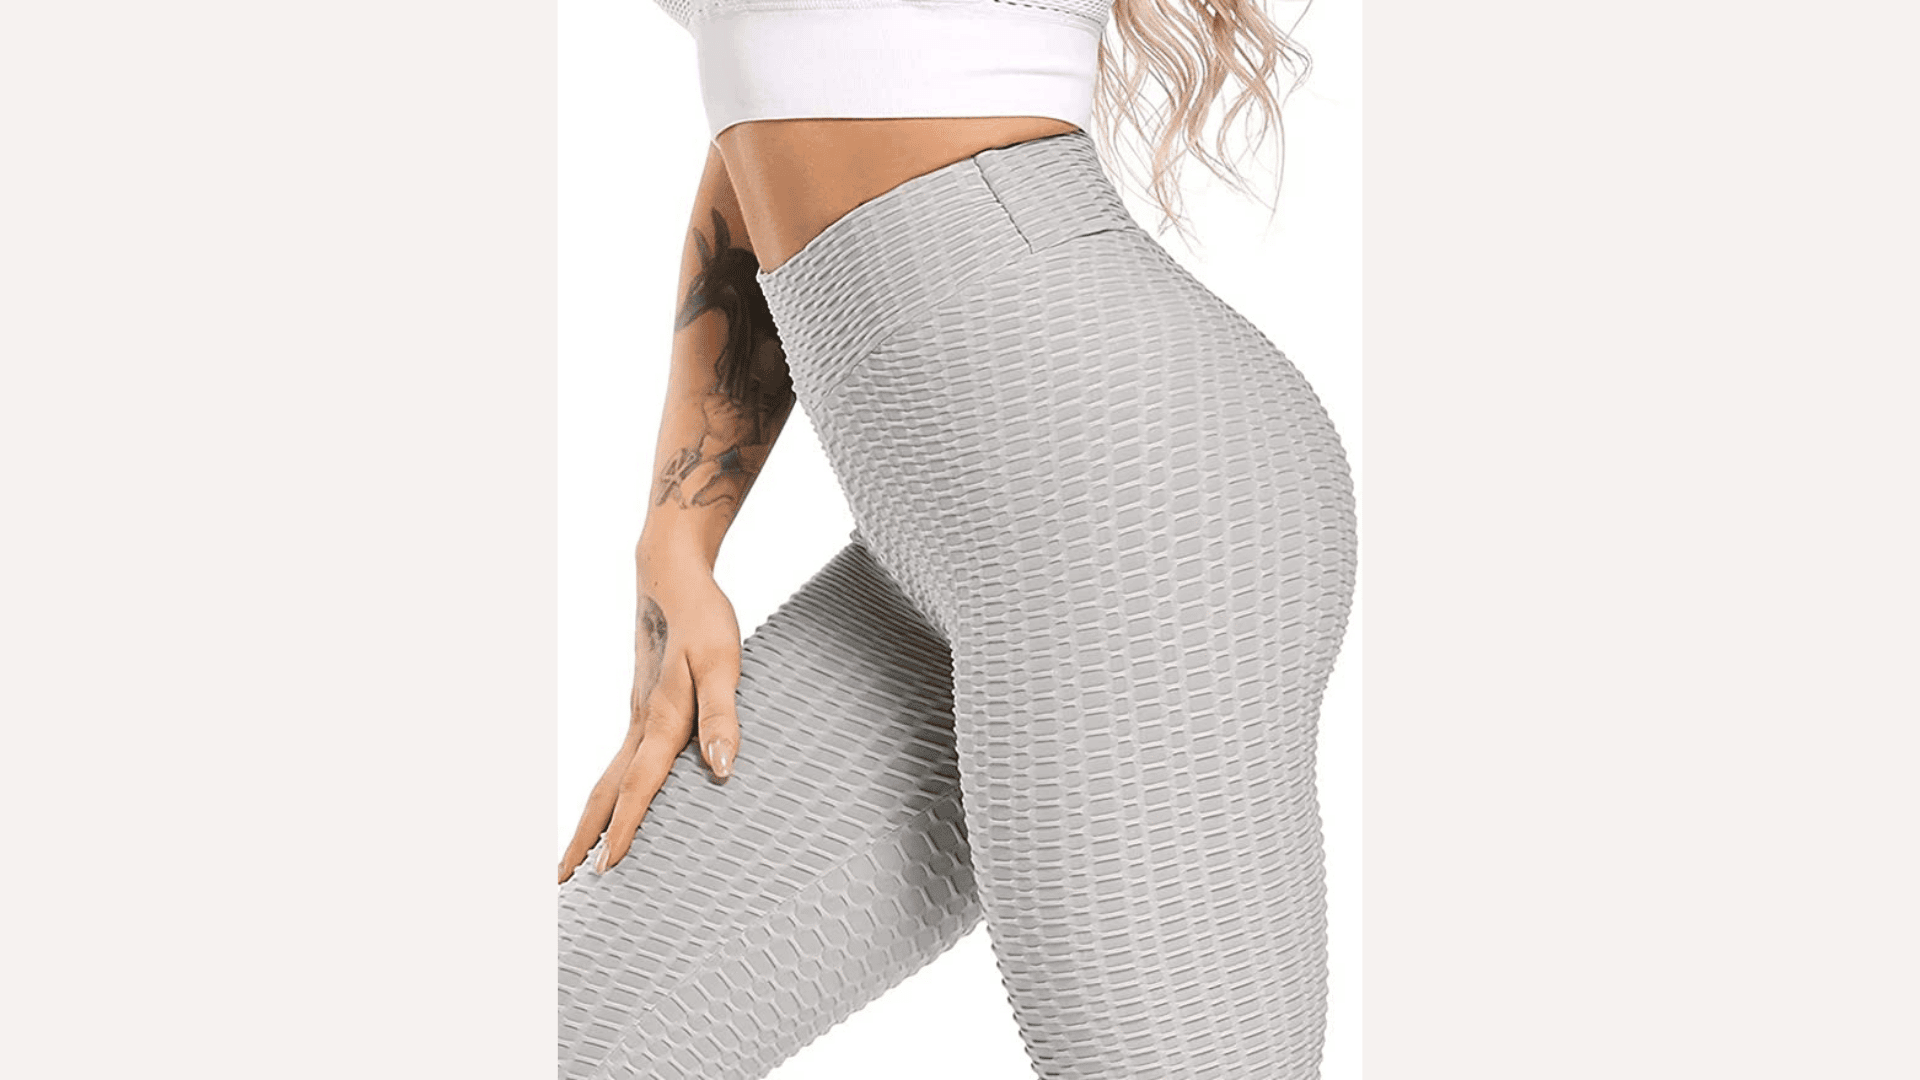 The Butt Crack Leggings That Broke the Internet Are on Sale Now